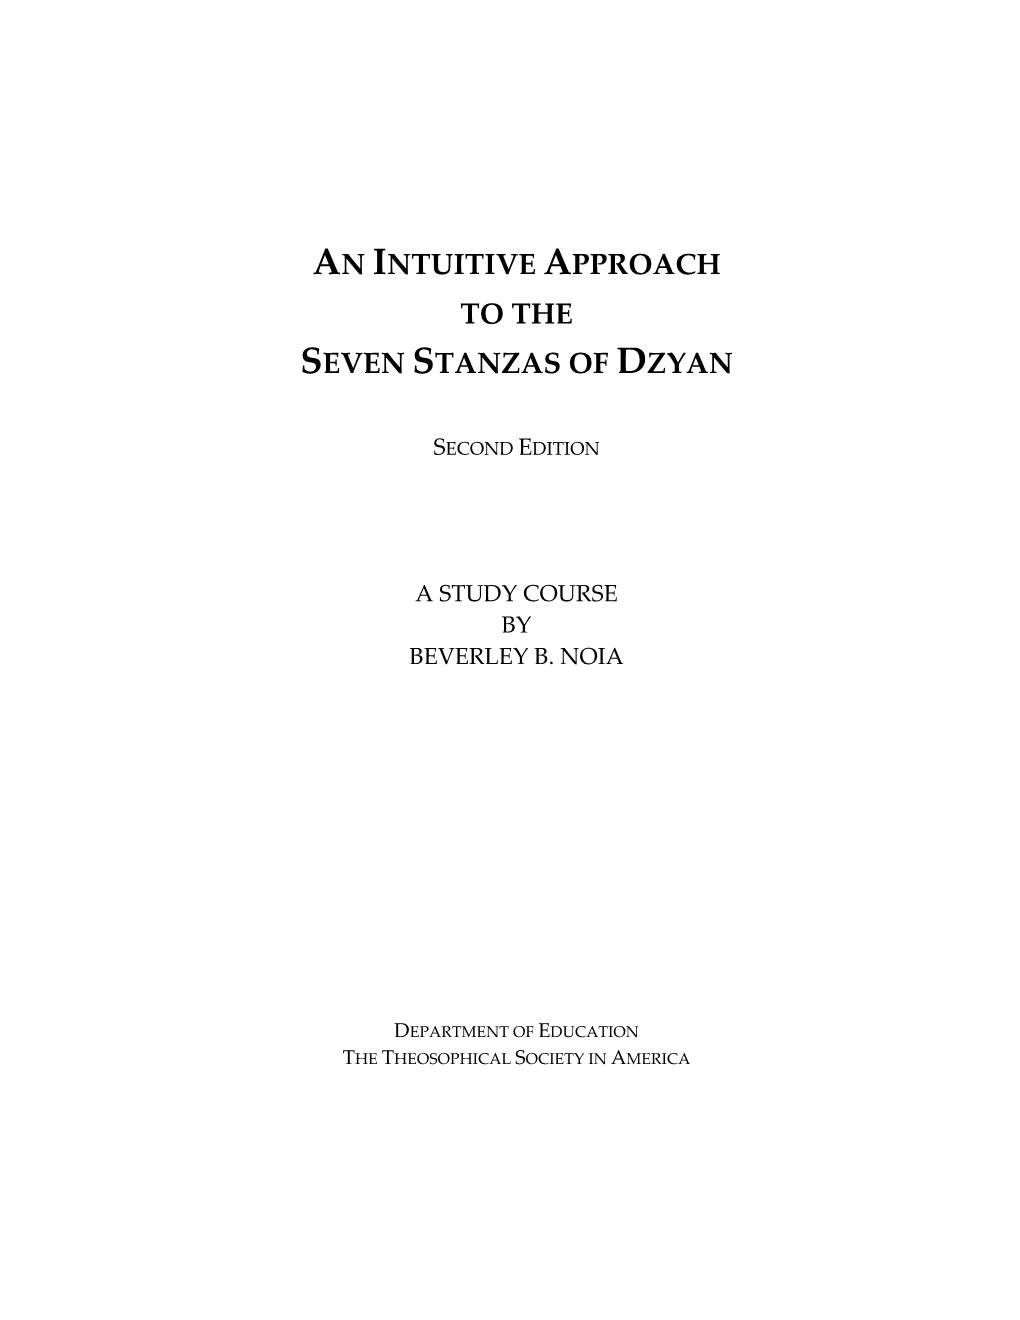 An Intuitive Approach to the Seven Stanzas of Dzyan